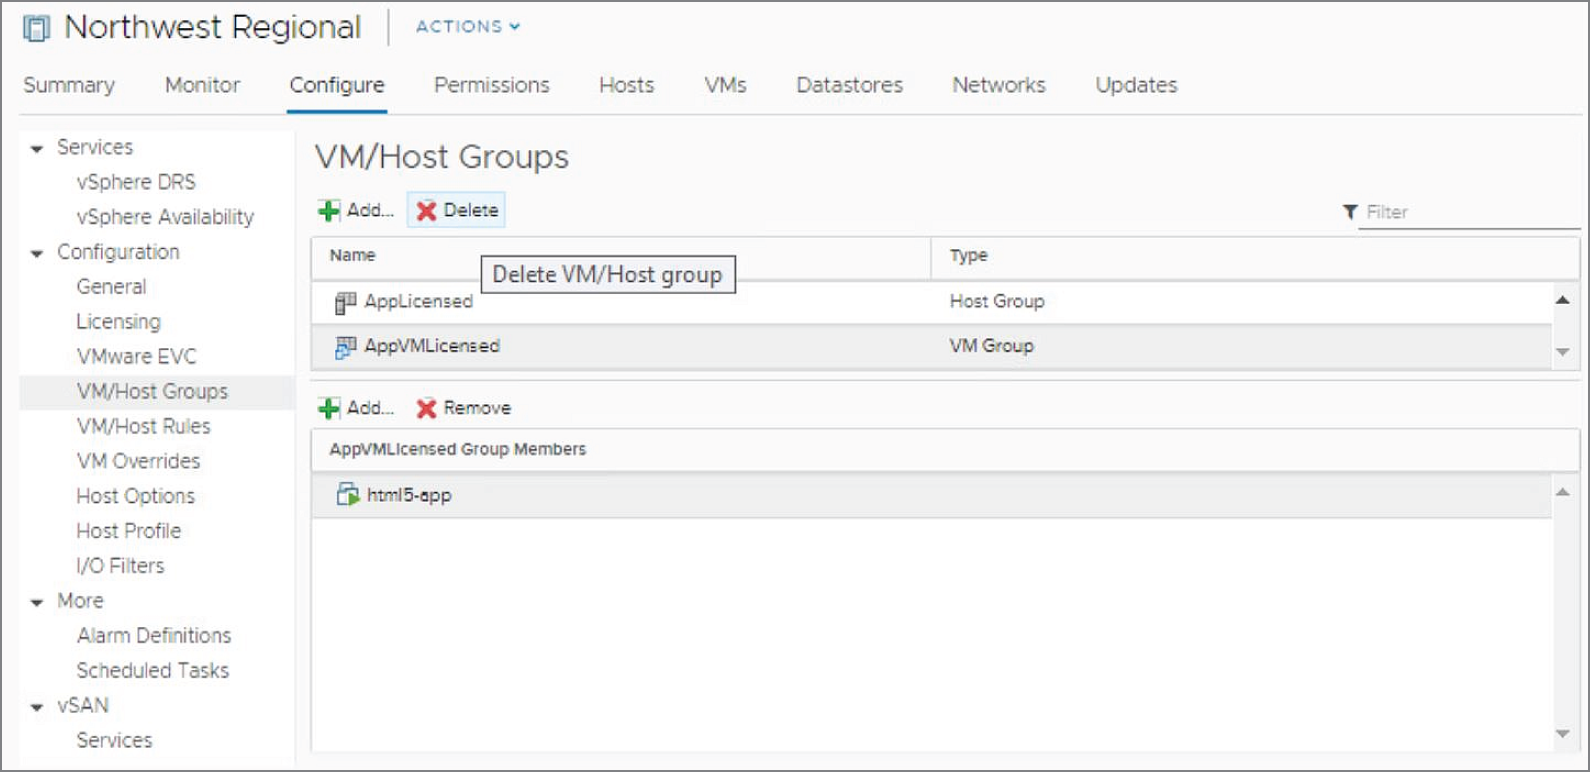 Snapshot of selecting VM/Host Groups from the Configuration drop-down in the navigation pane, then click the Delete button.